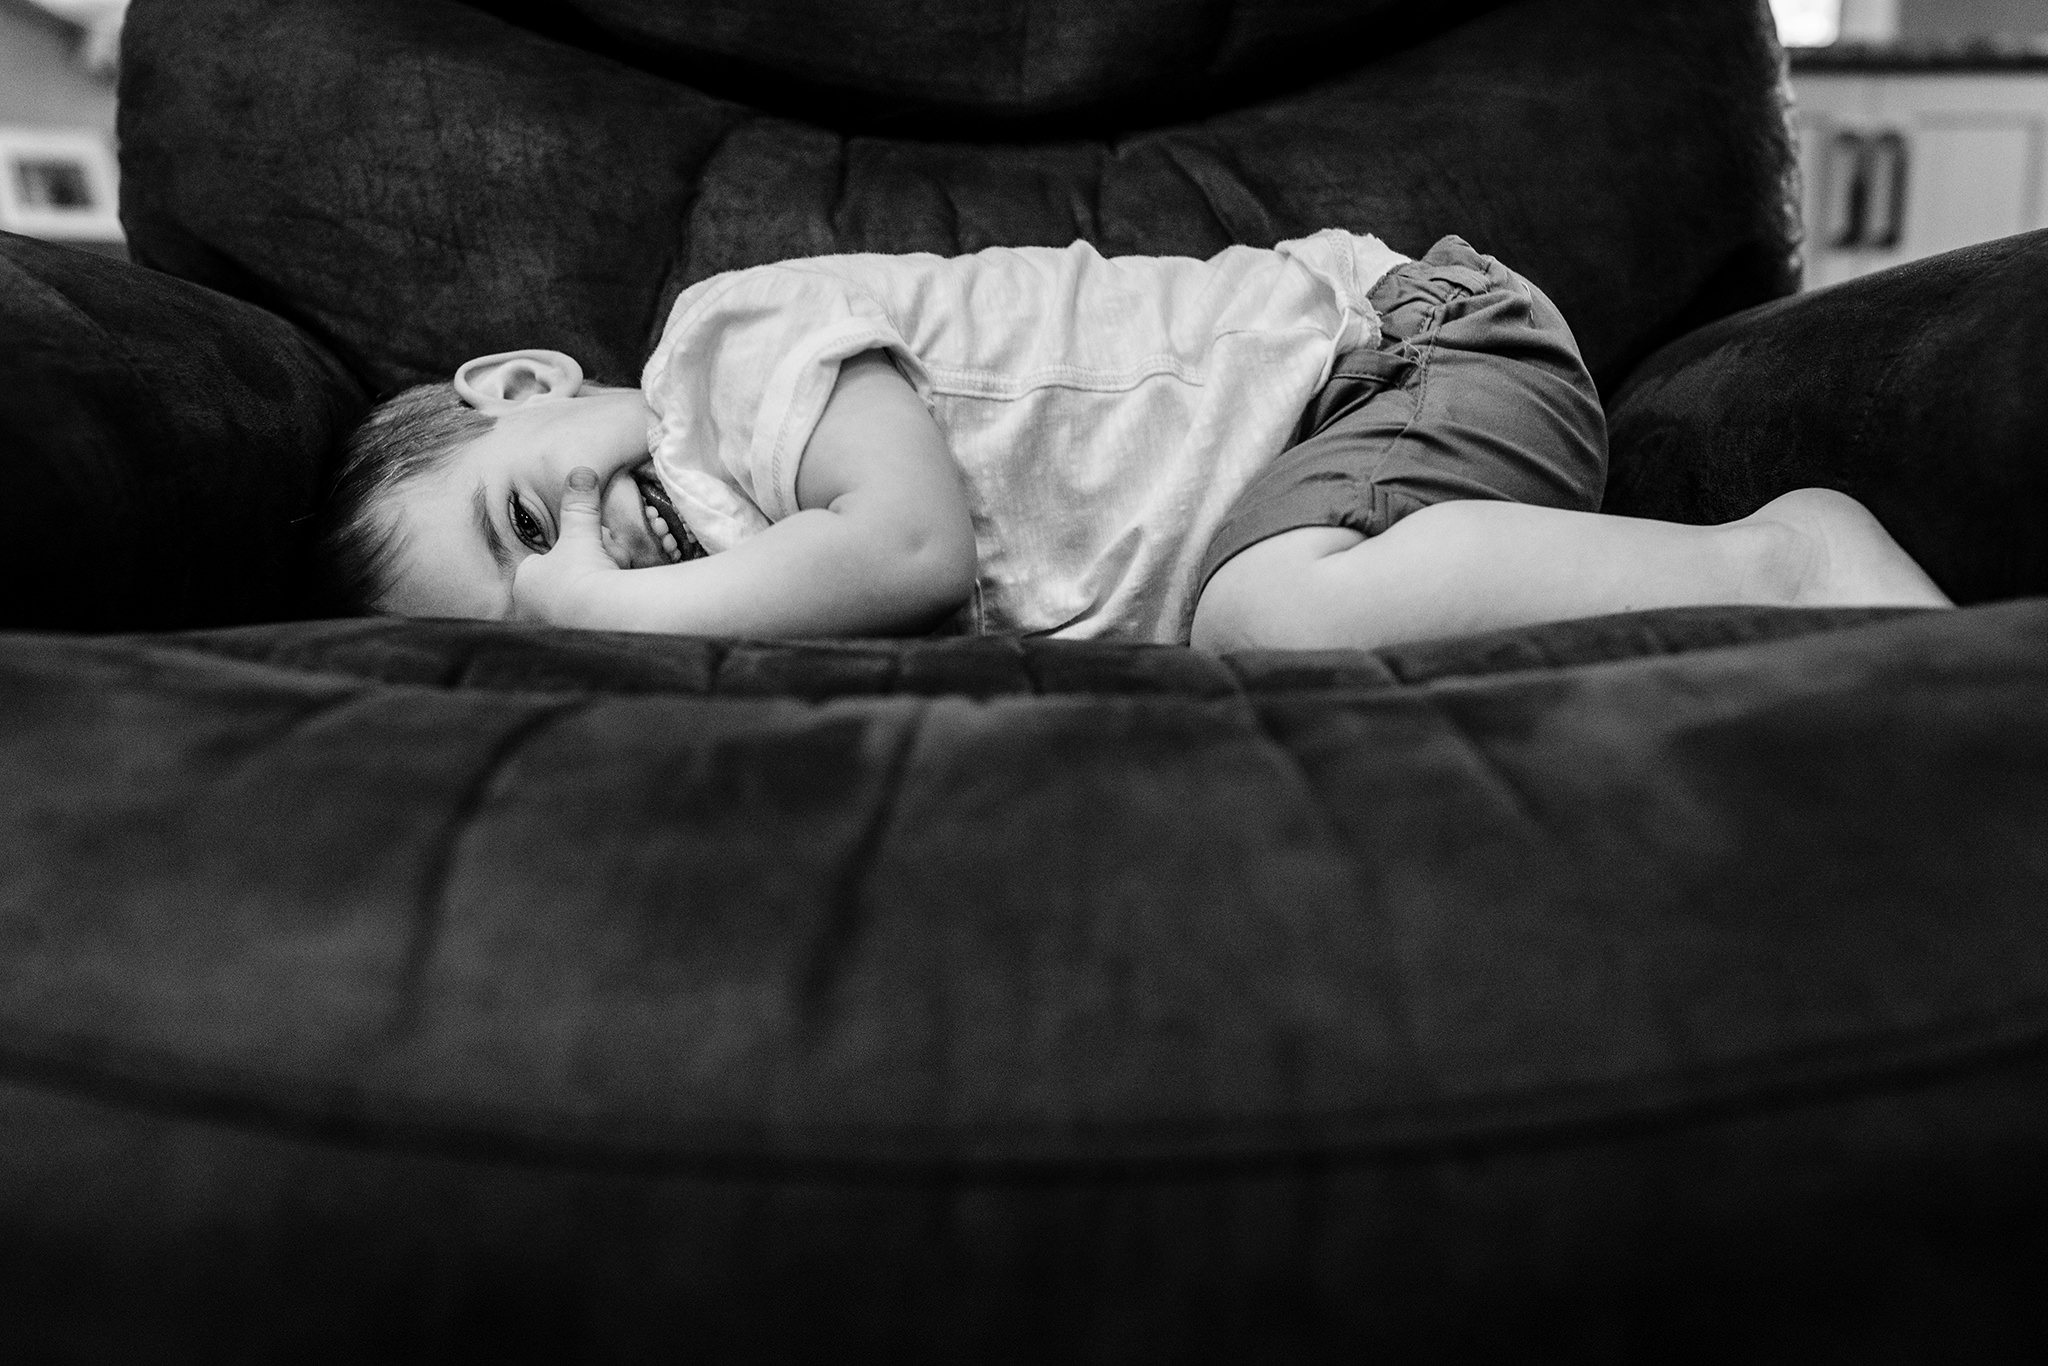 Young boy smiles while laying across a recliner chair with his arms and legs tucked in.